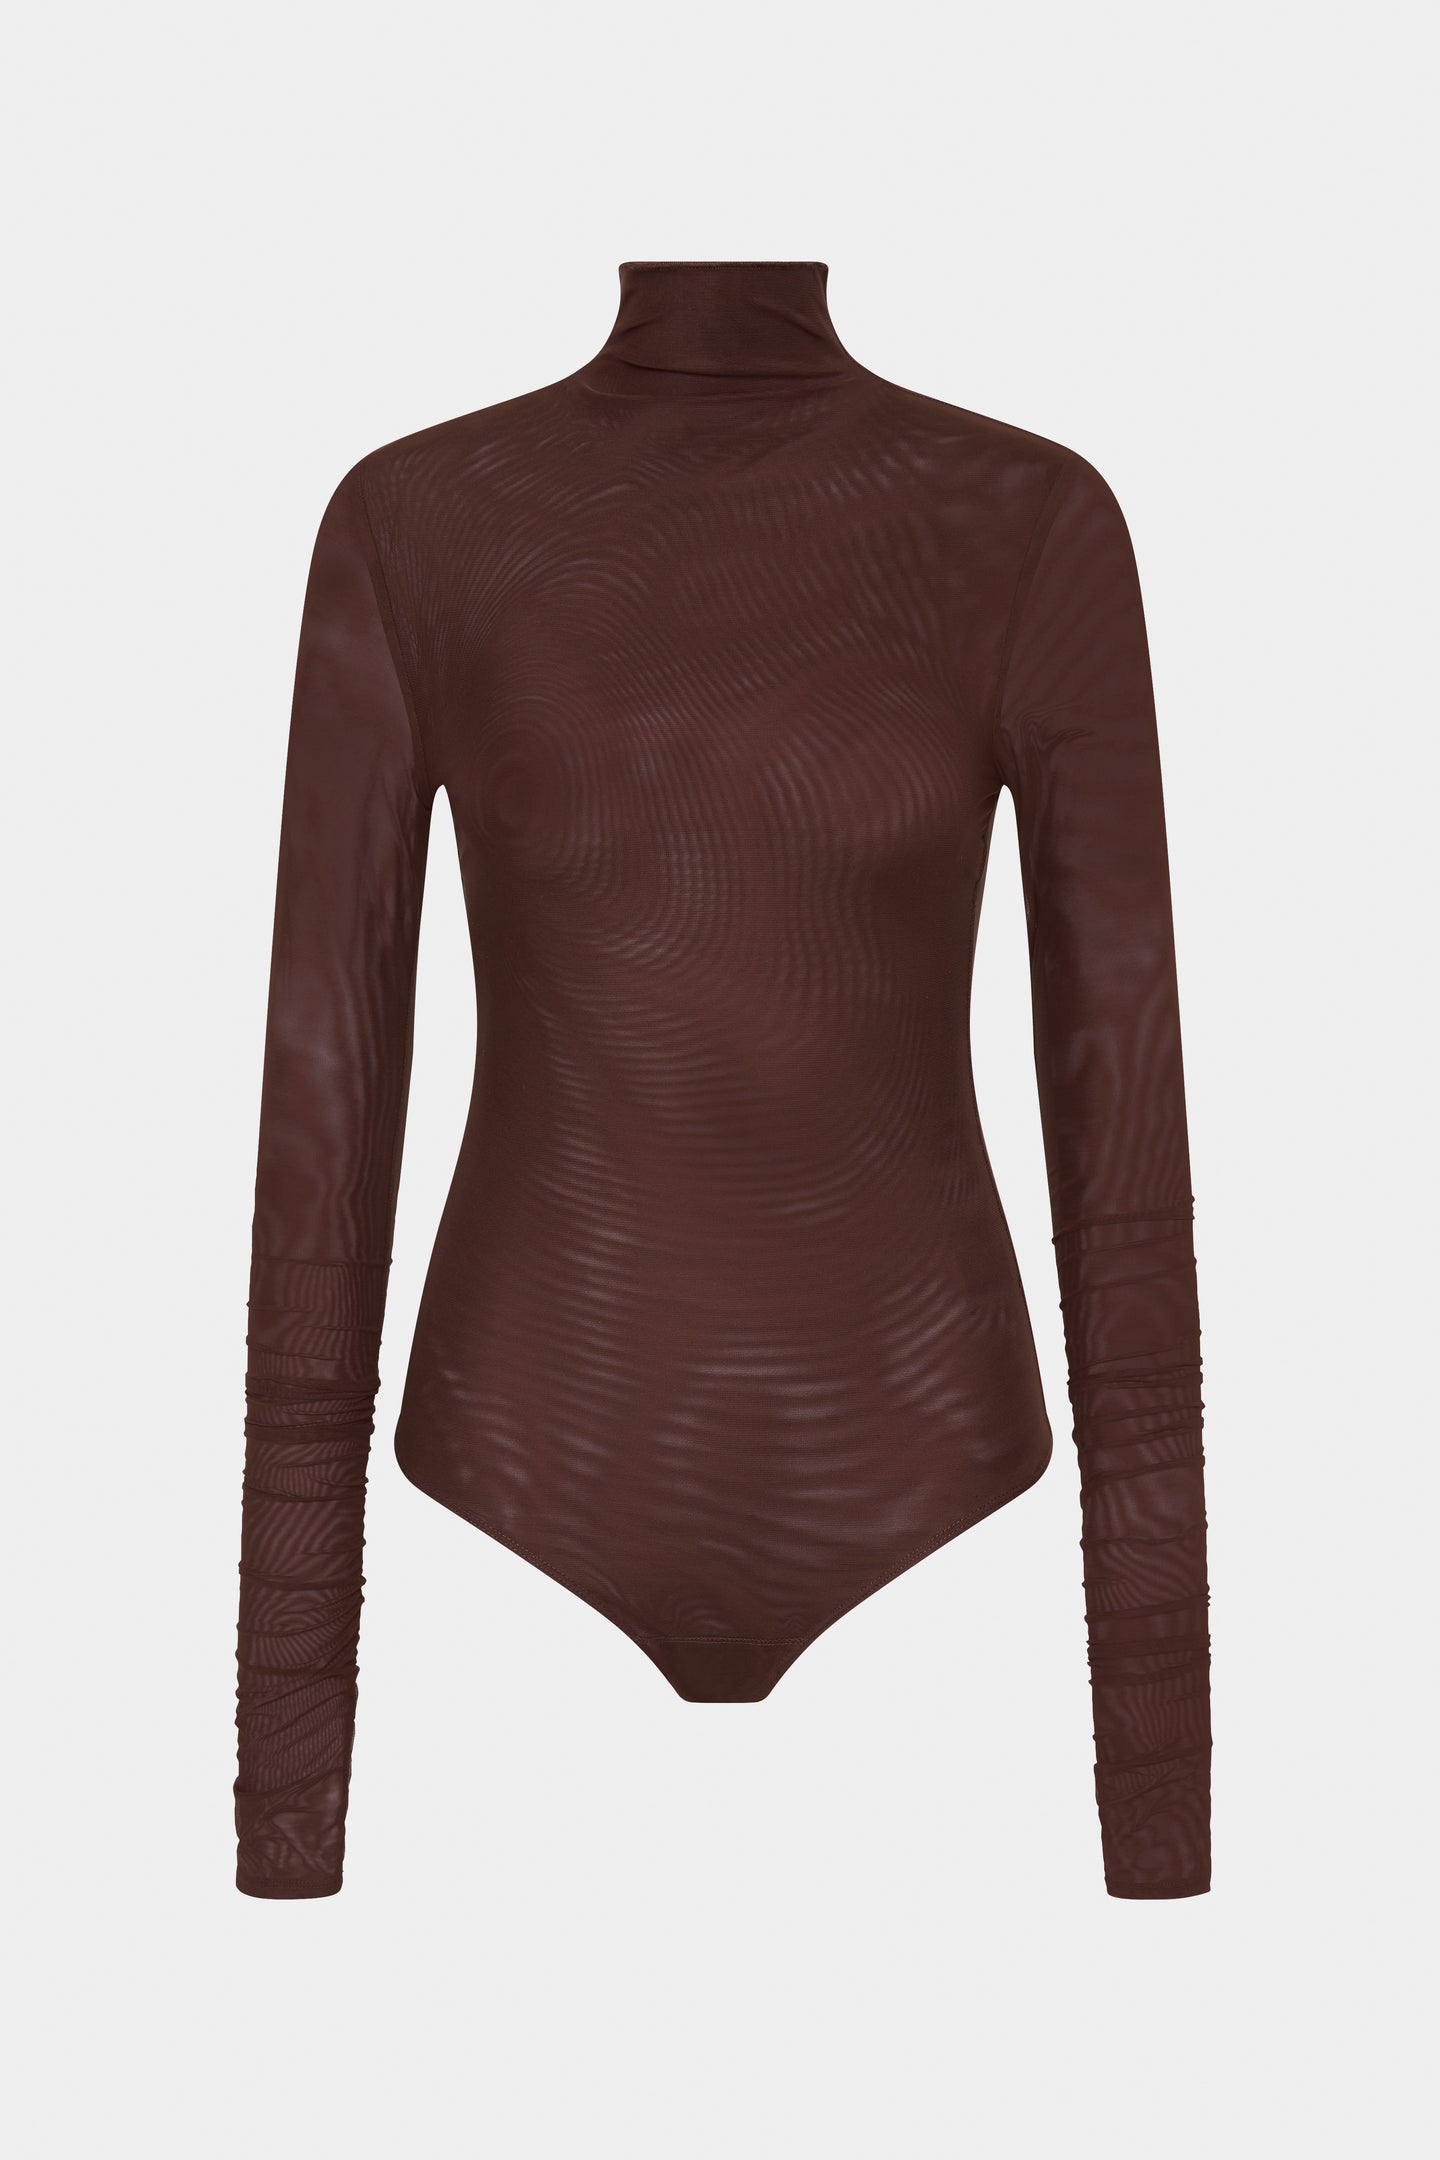 SIR the label Jacques Mesh Bodysuit CHOCOLATE